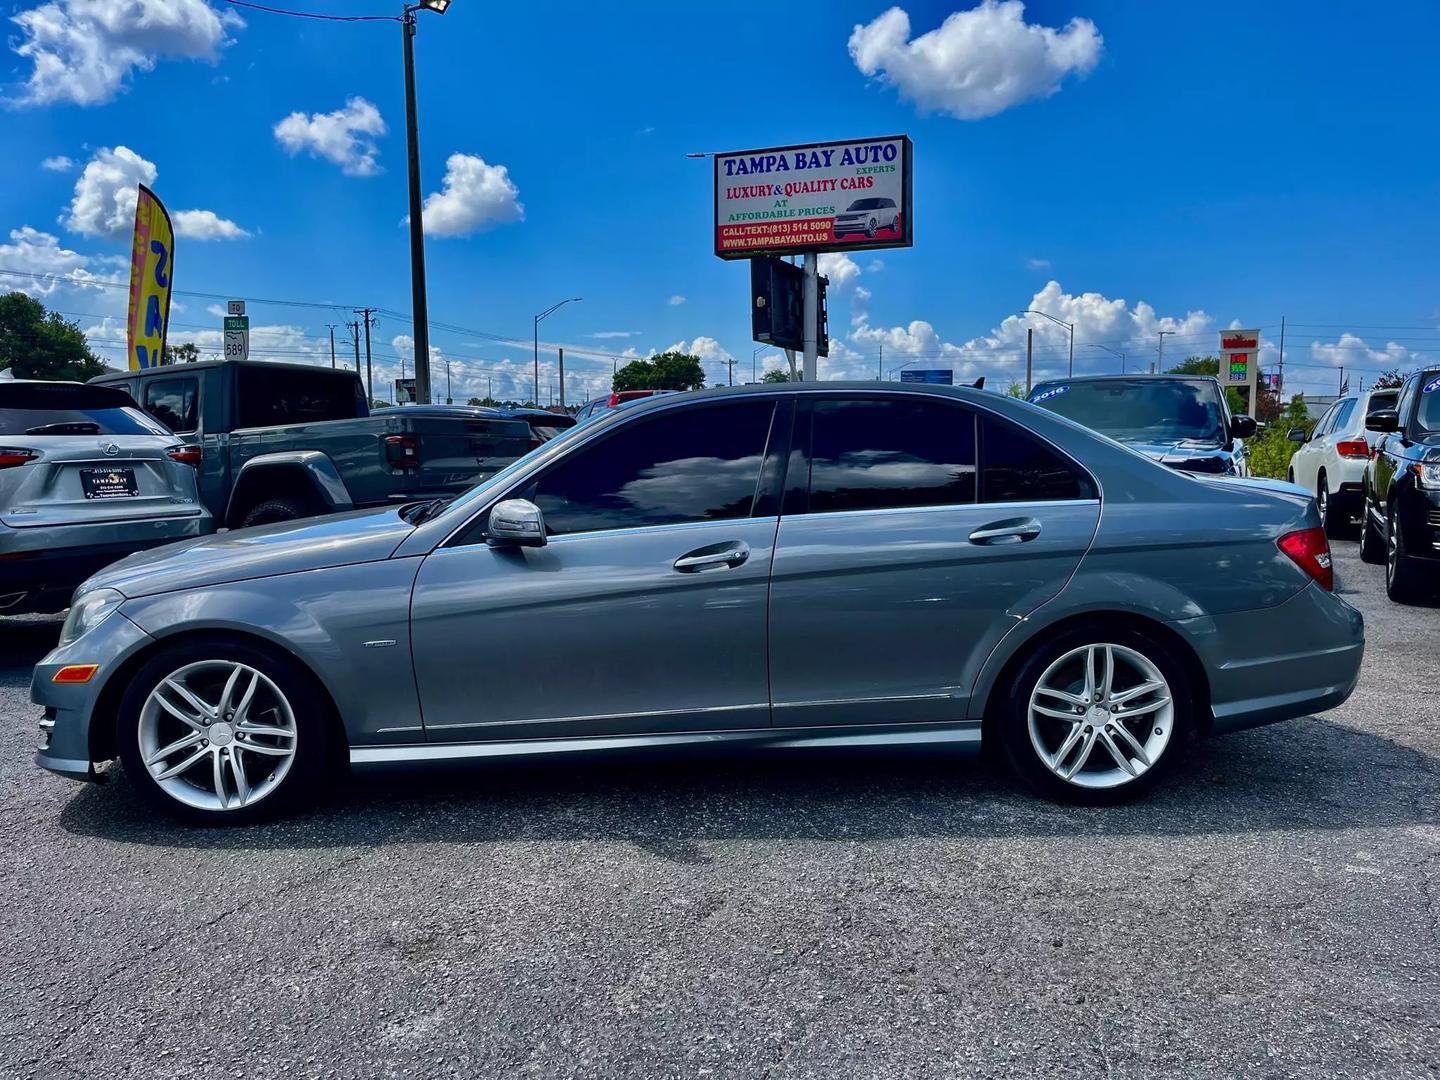 Used 2012 Mercedes-Benz C-Class C250 Sport with VIN WDDGF4HB5CR214286 for sale in Tampa, FL